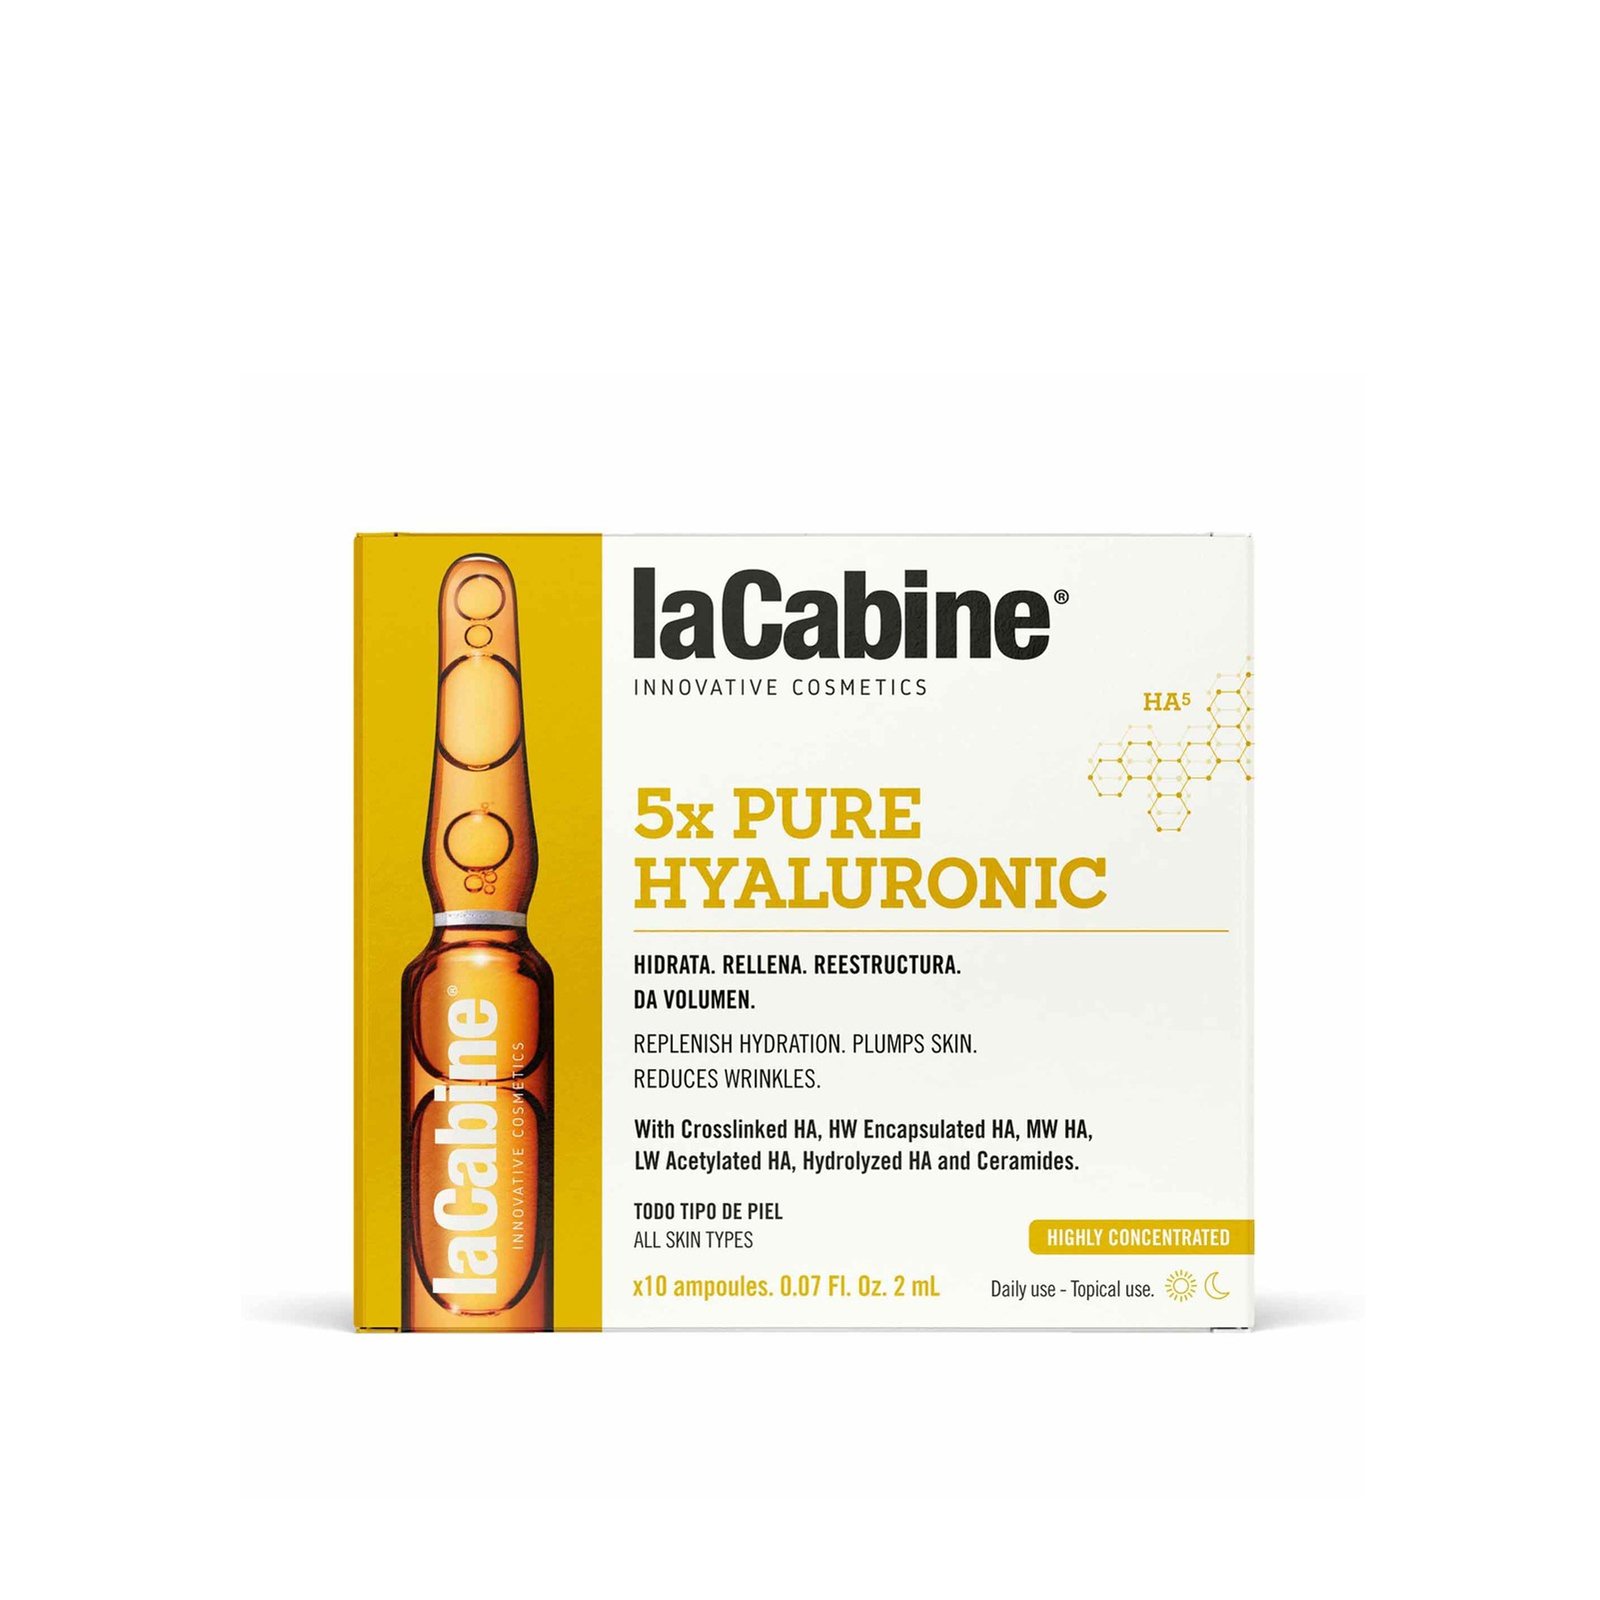 La Cabine 5x Pure Hyaluronic Concentrated Ampoules 10x2ml